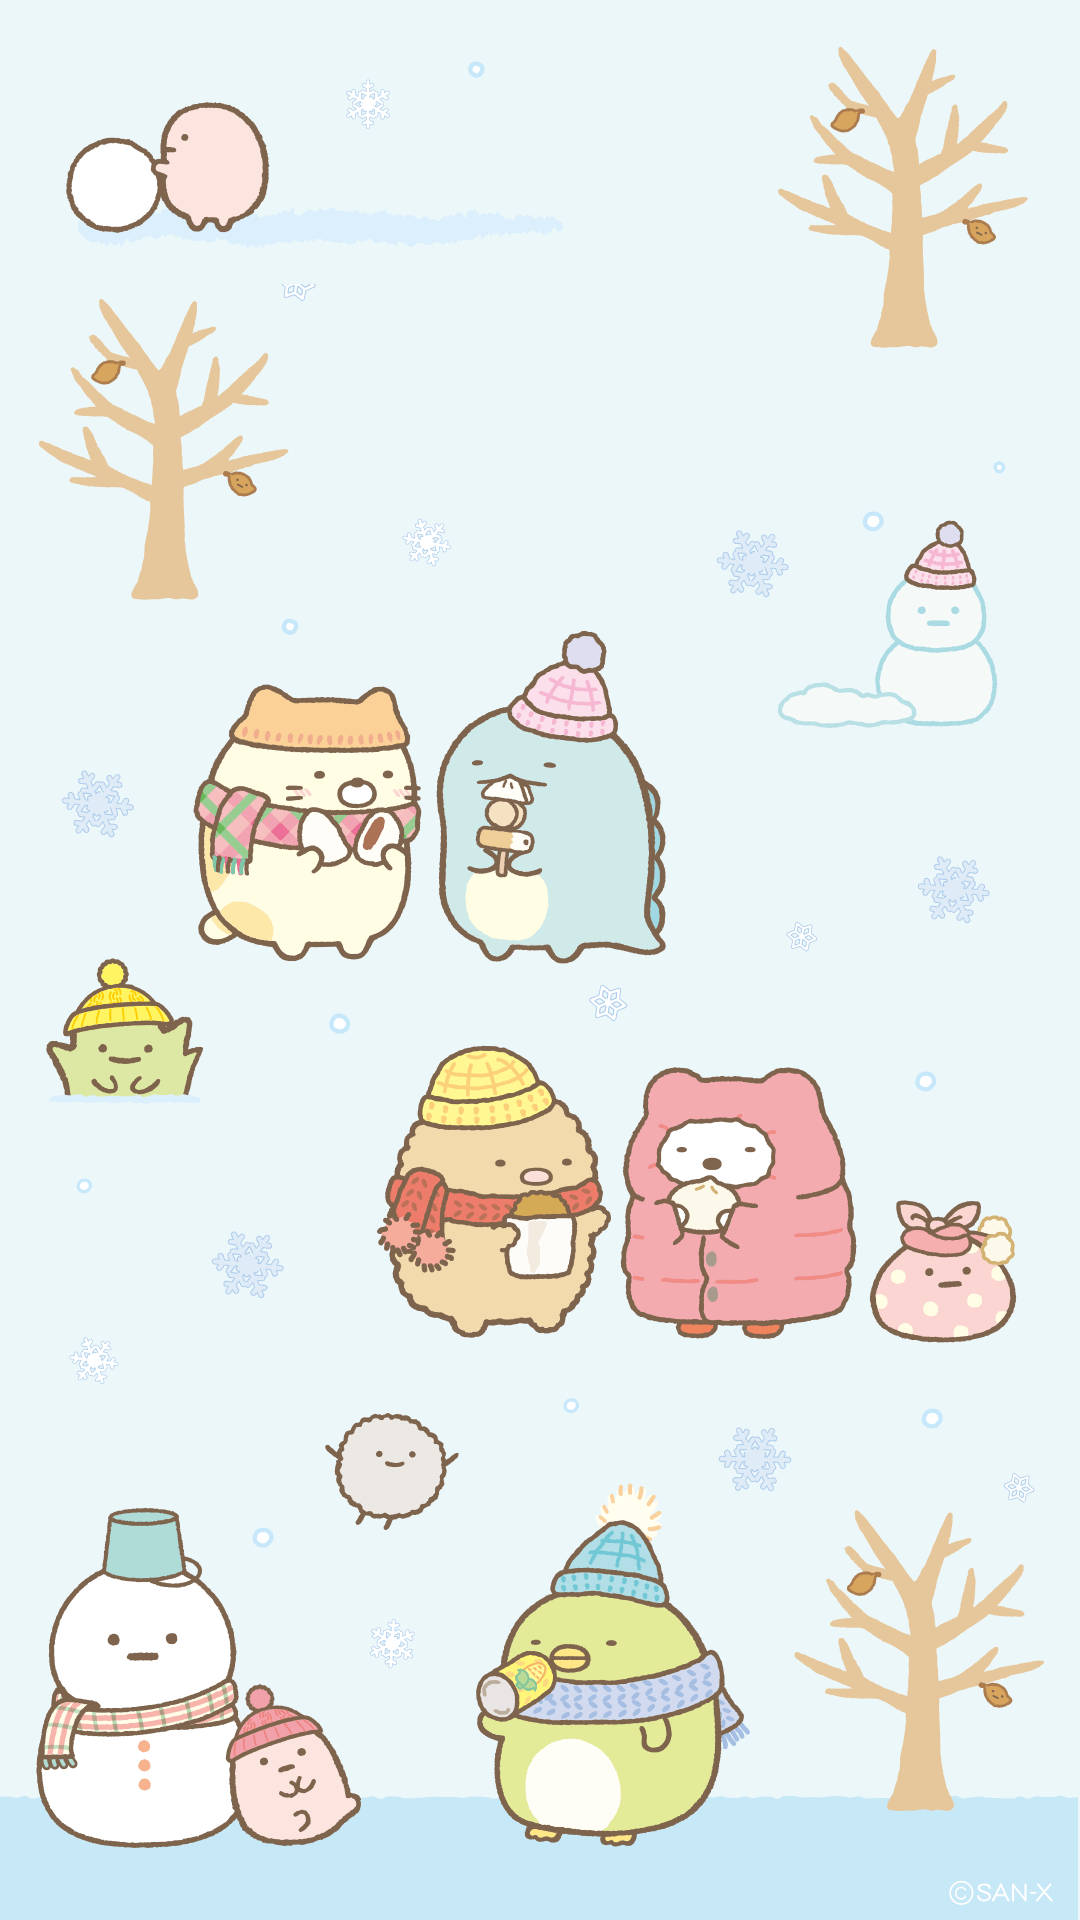 Stay warm and cozy during the winter months with Sumikko Gurashi! Wallpaper